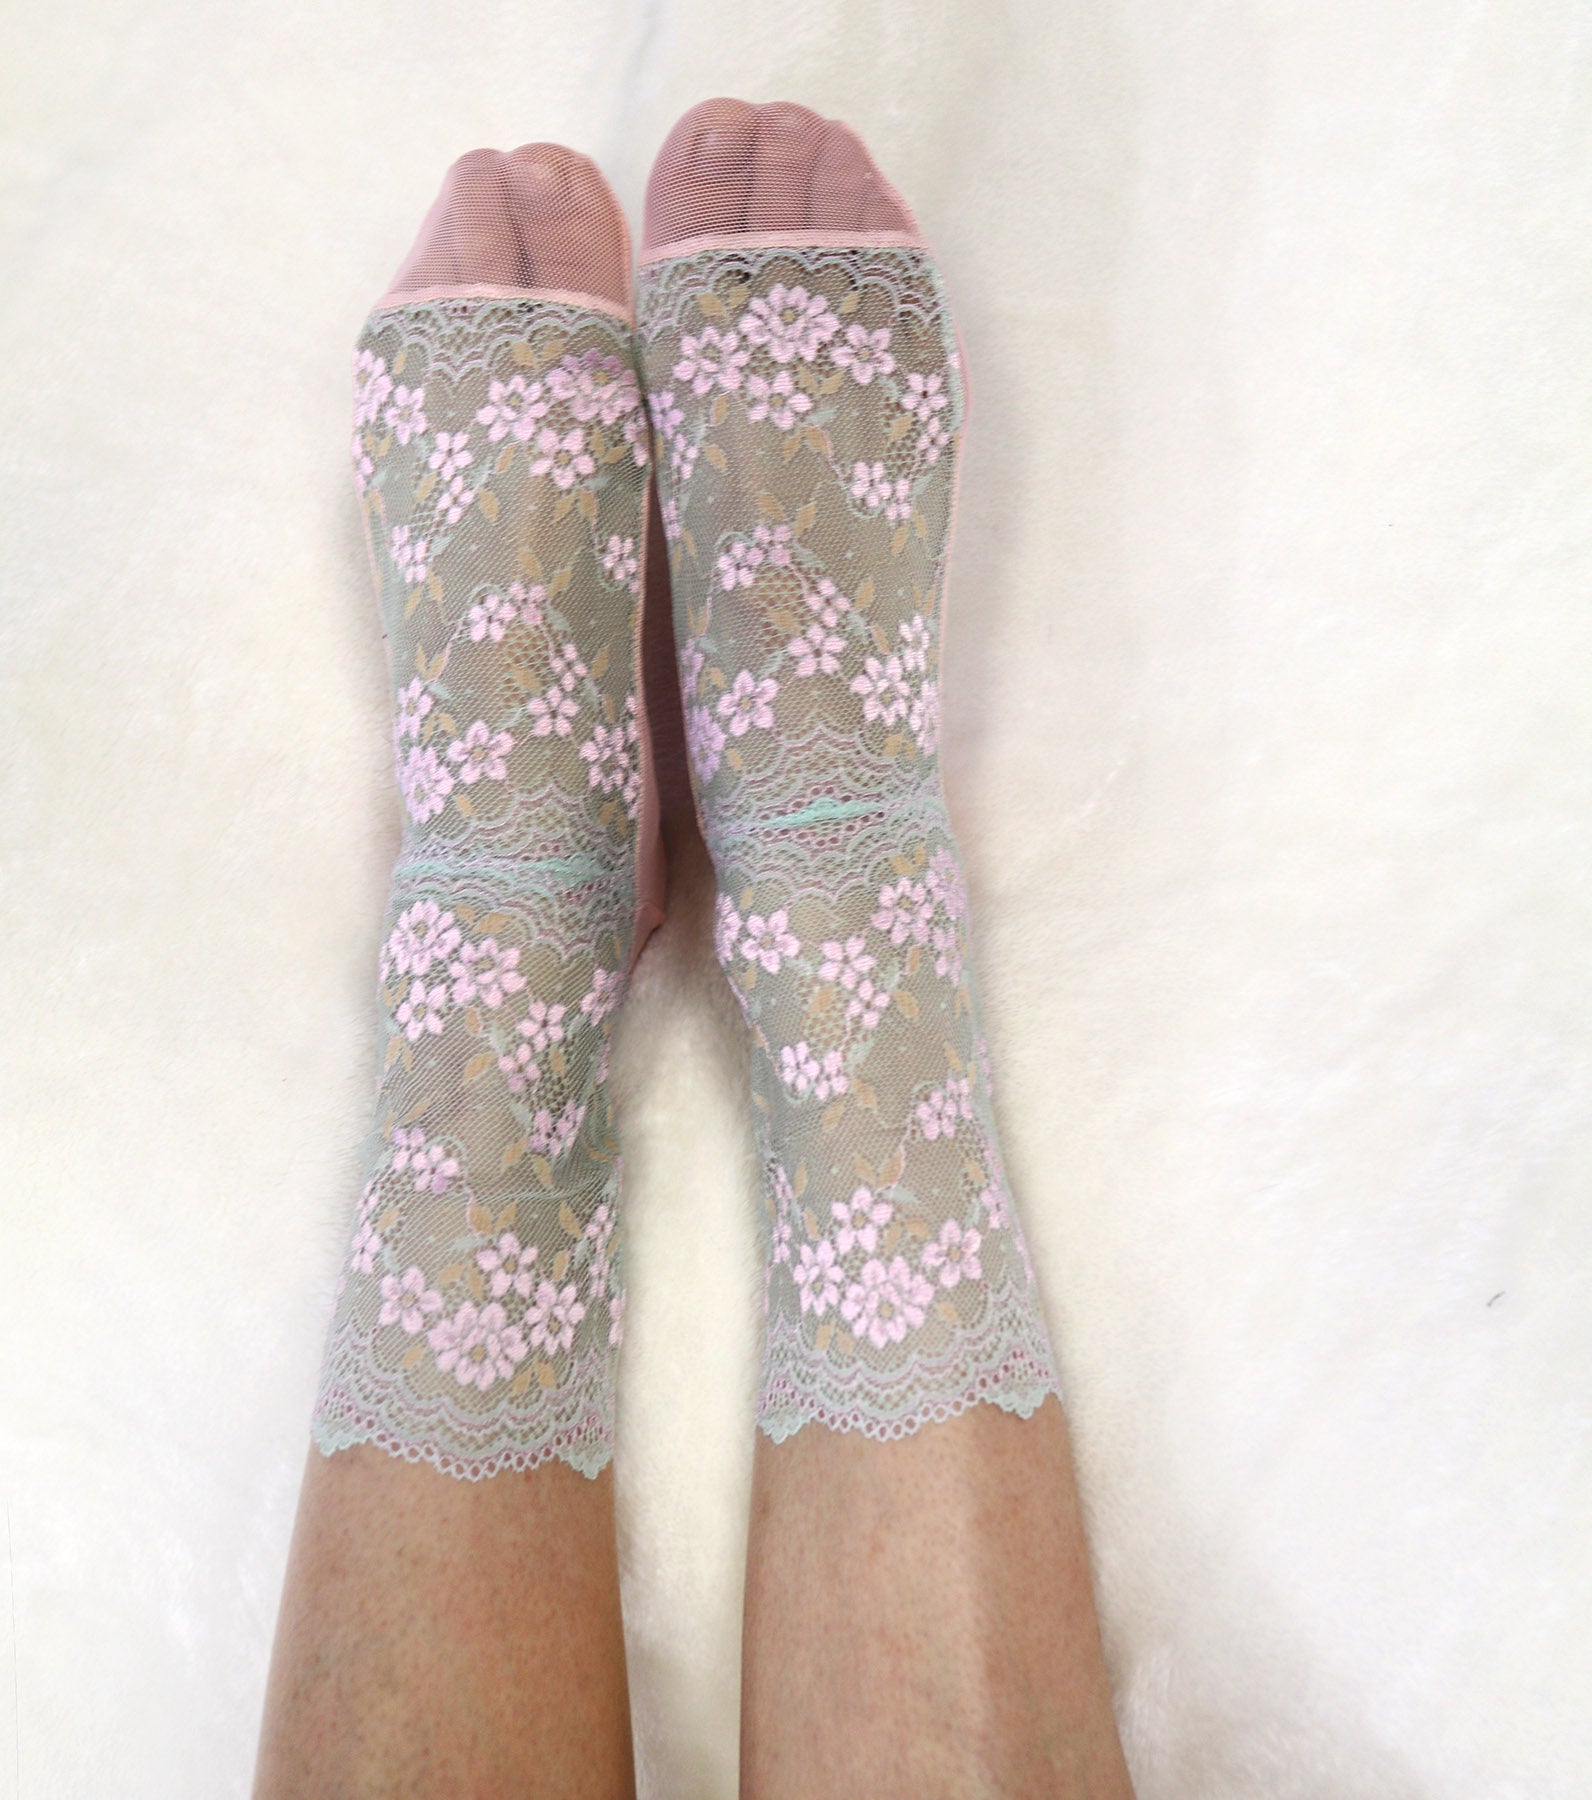 Embroidered Lace Women's Socks. Light Mint Green and pink